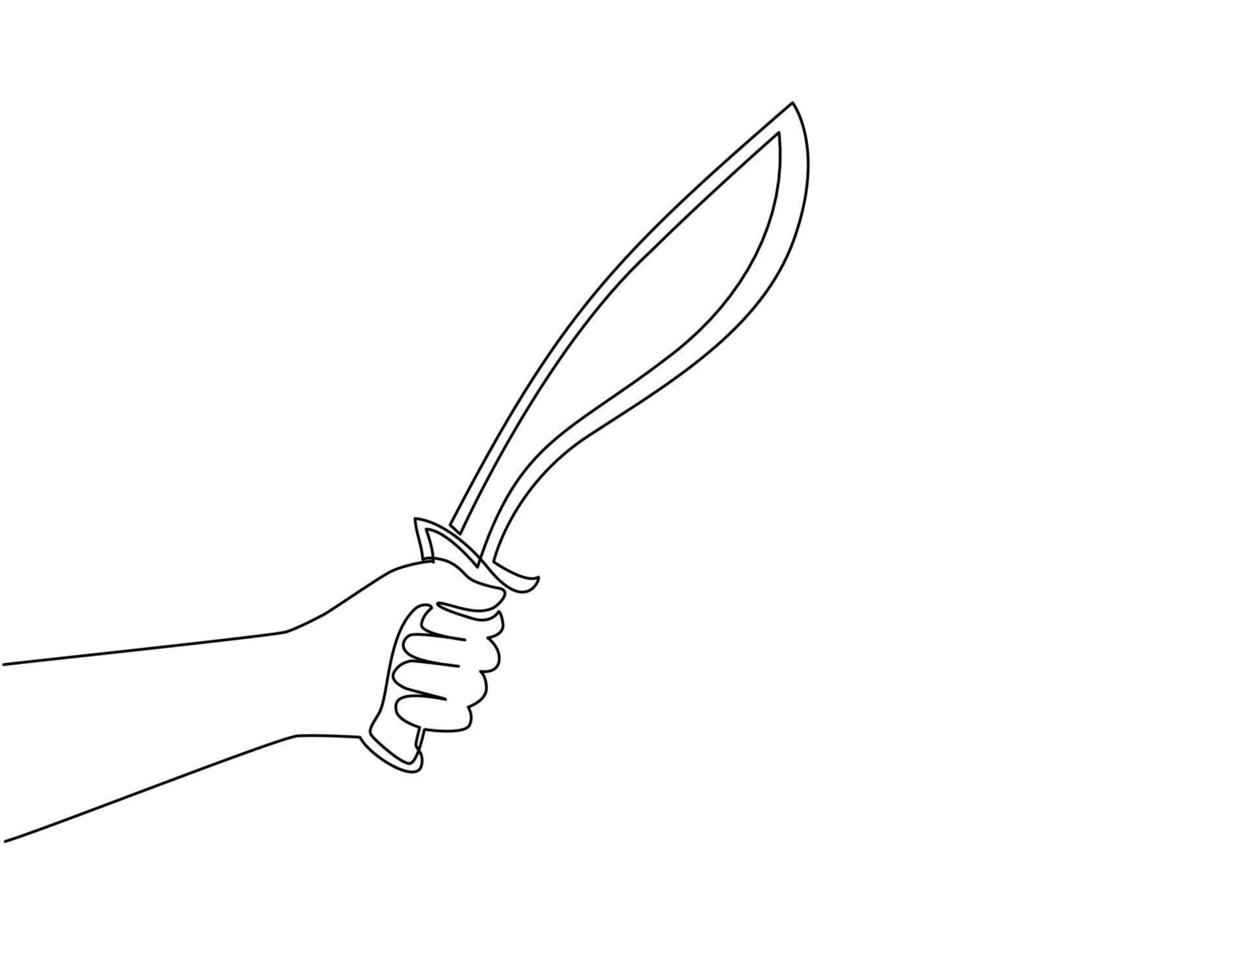 Single continuous line drawing man hand hold machetes knife with curved blade. Machete agricultural instrument or weapon engraving style icon. Dynamic one line draw graphic design vector illustration